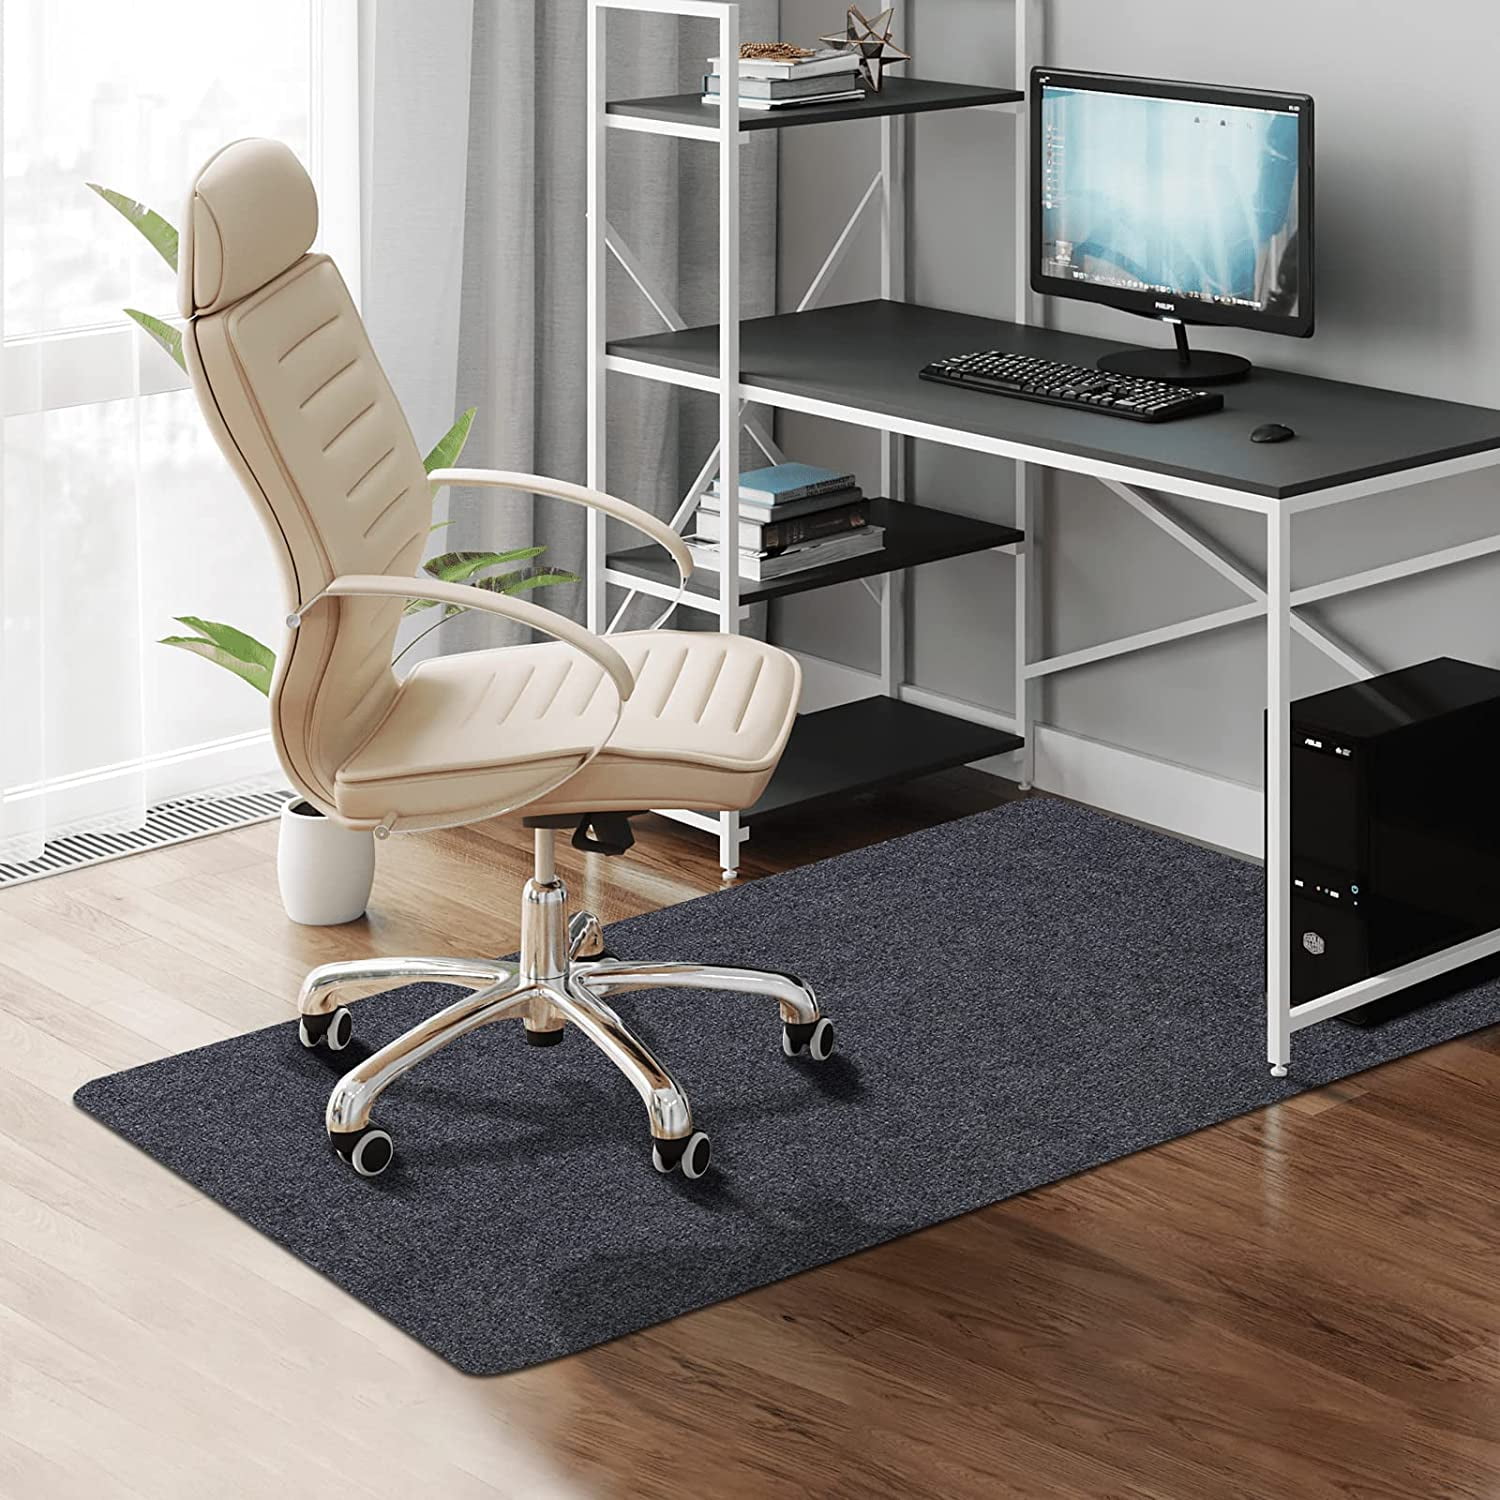 Hard Floor Protector Multi-Purpose Chair Carpet for Home,35inchx 47inch Thick 0.16inch Office Chair Mat Desk mat for Hardwood Floor Light Grey Office Computer Chair Mat 